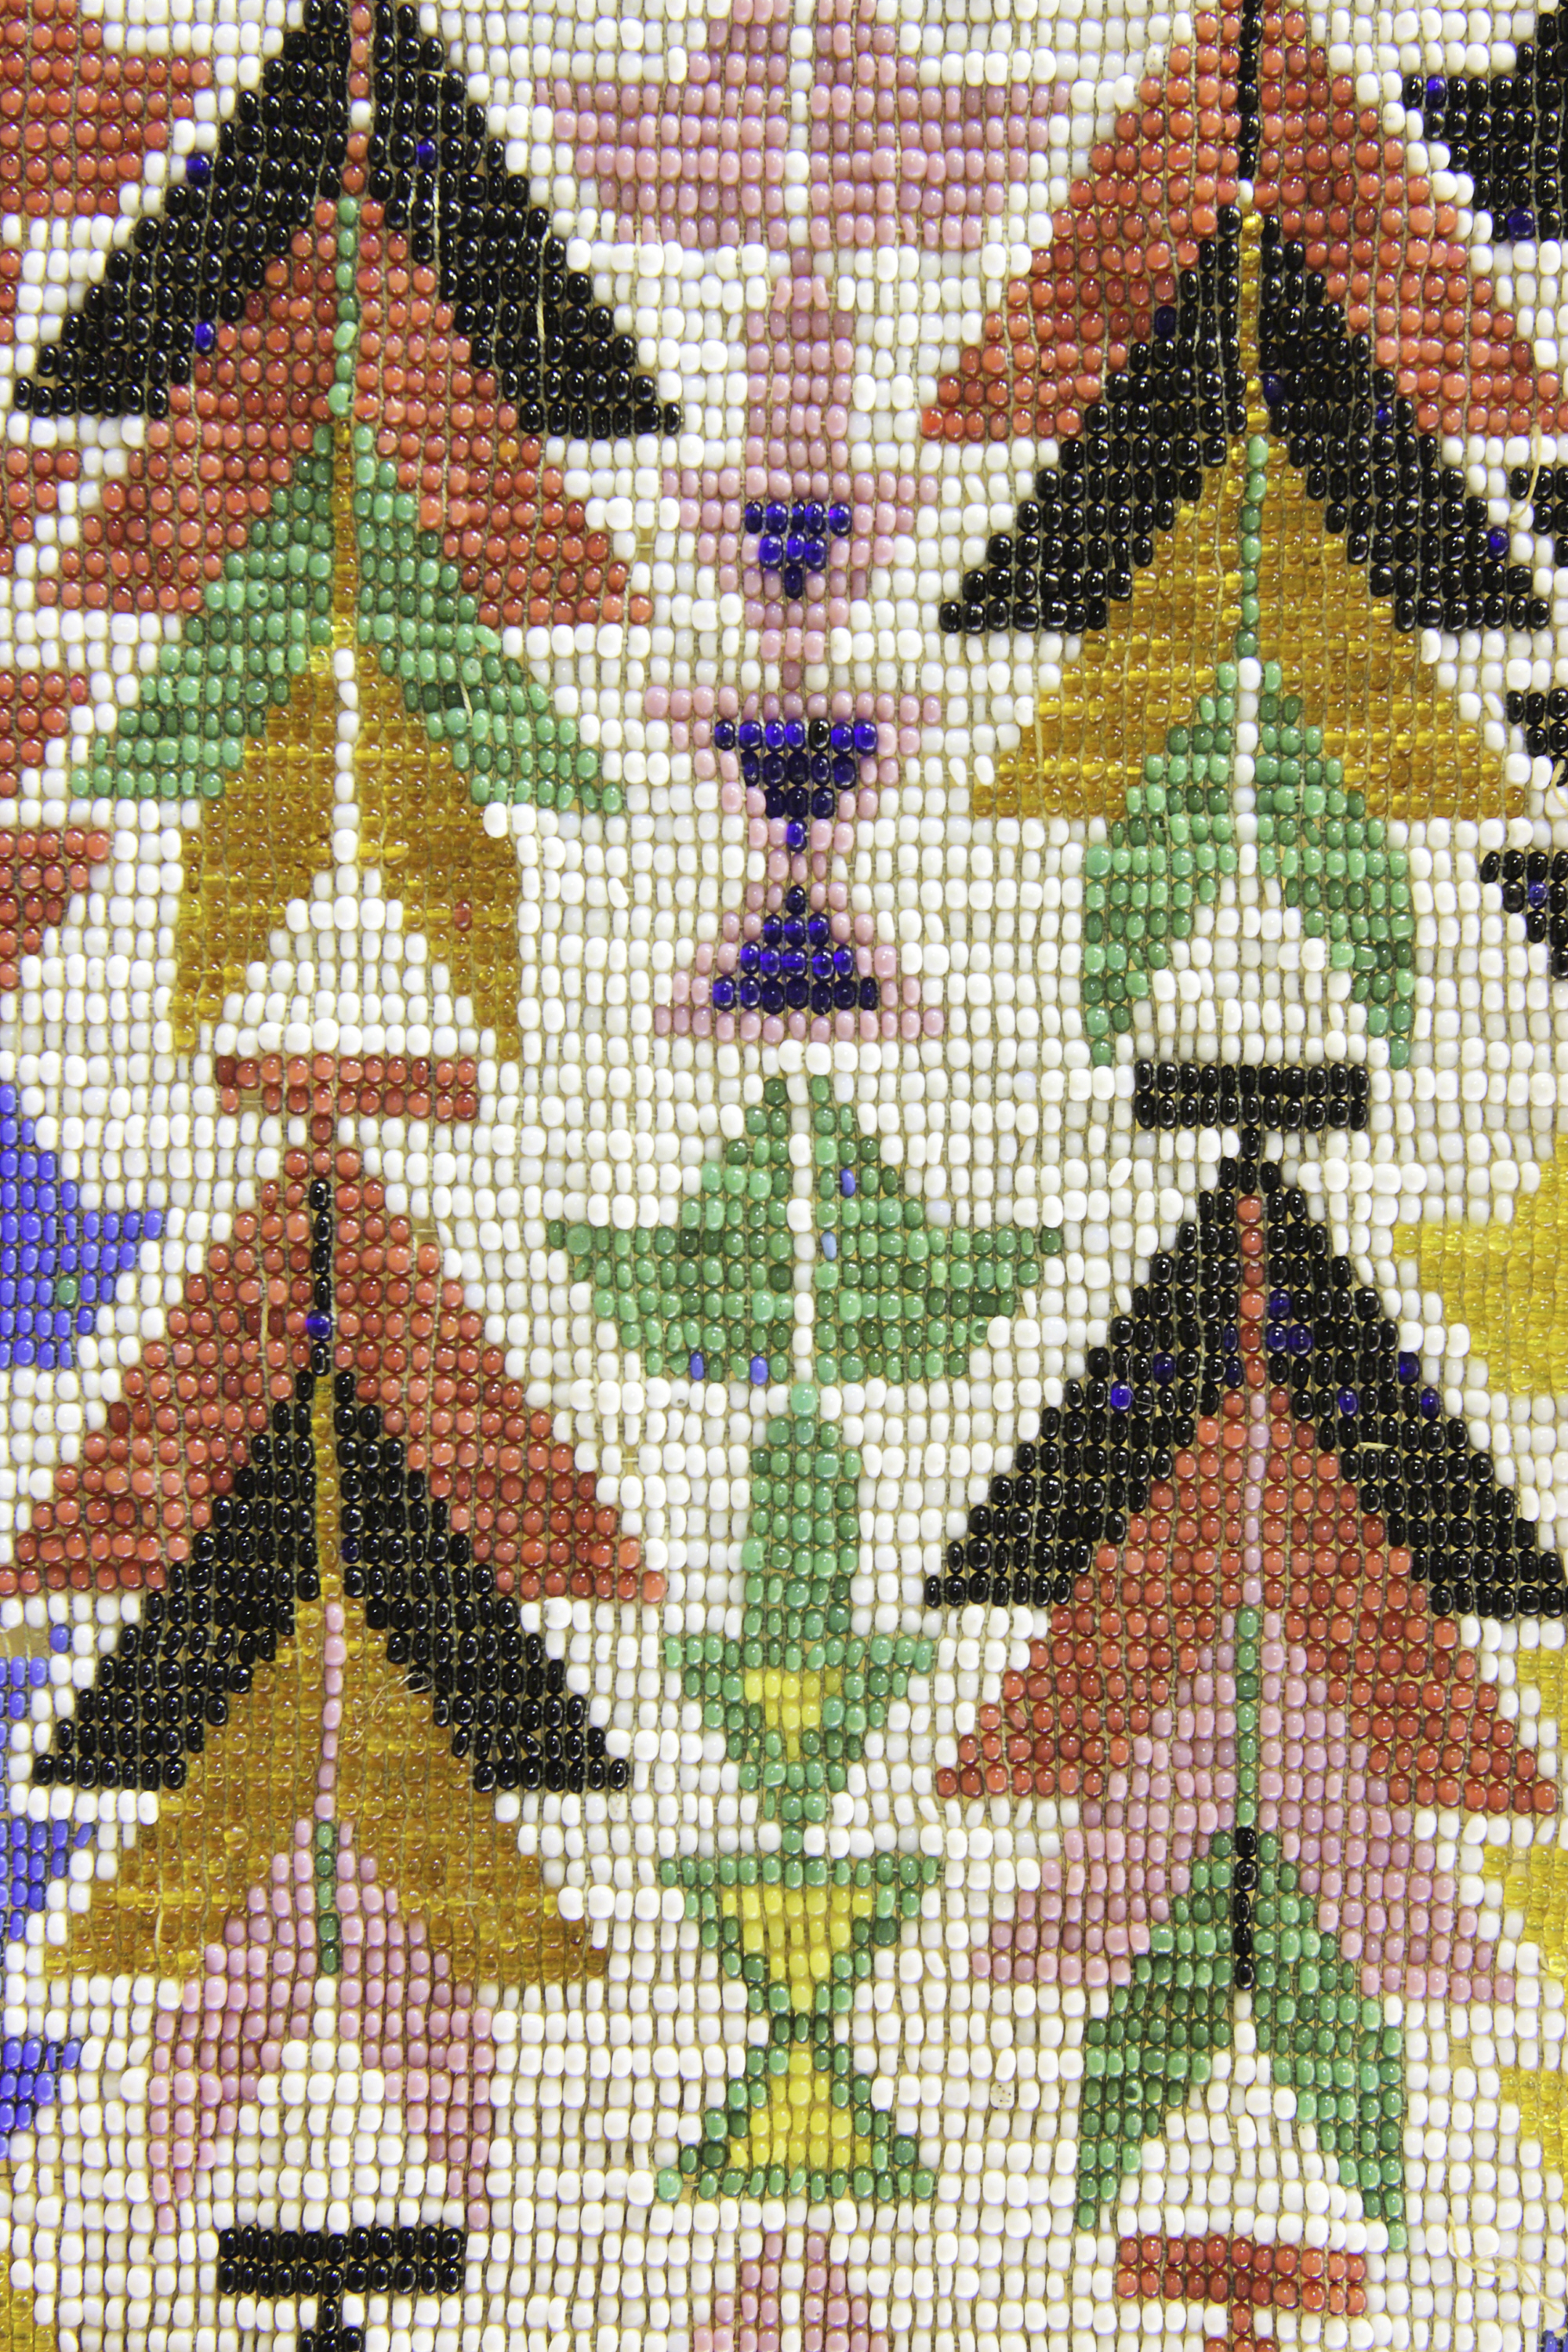 Shawnee Indian Bead Artwork from the 1830s.